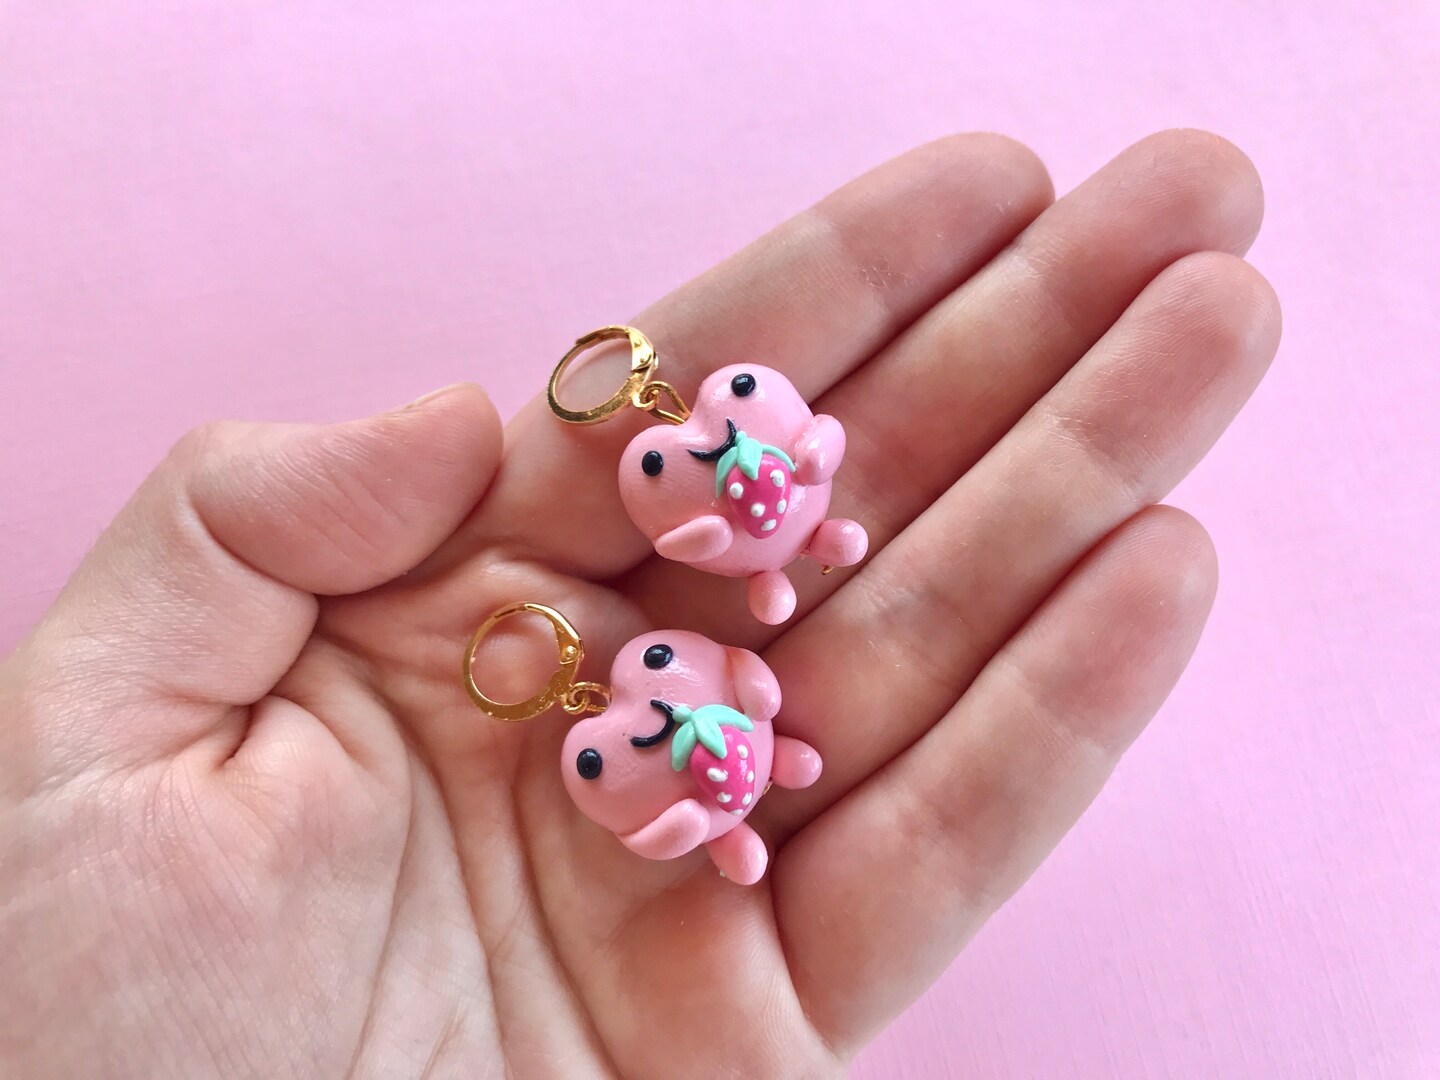 Strawberry Frog Squishmallow Earrings | Polymer Clay Jewelry | Handmade Statement Earrings | Cottagecore | Kawaii